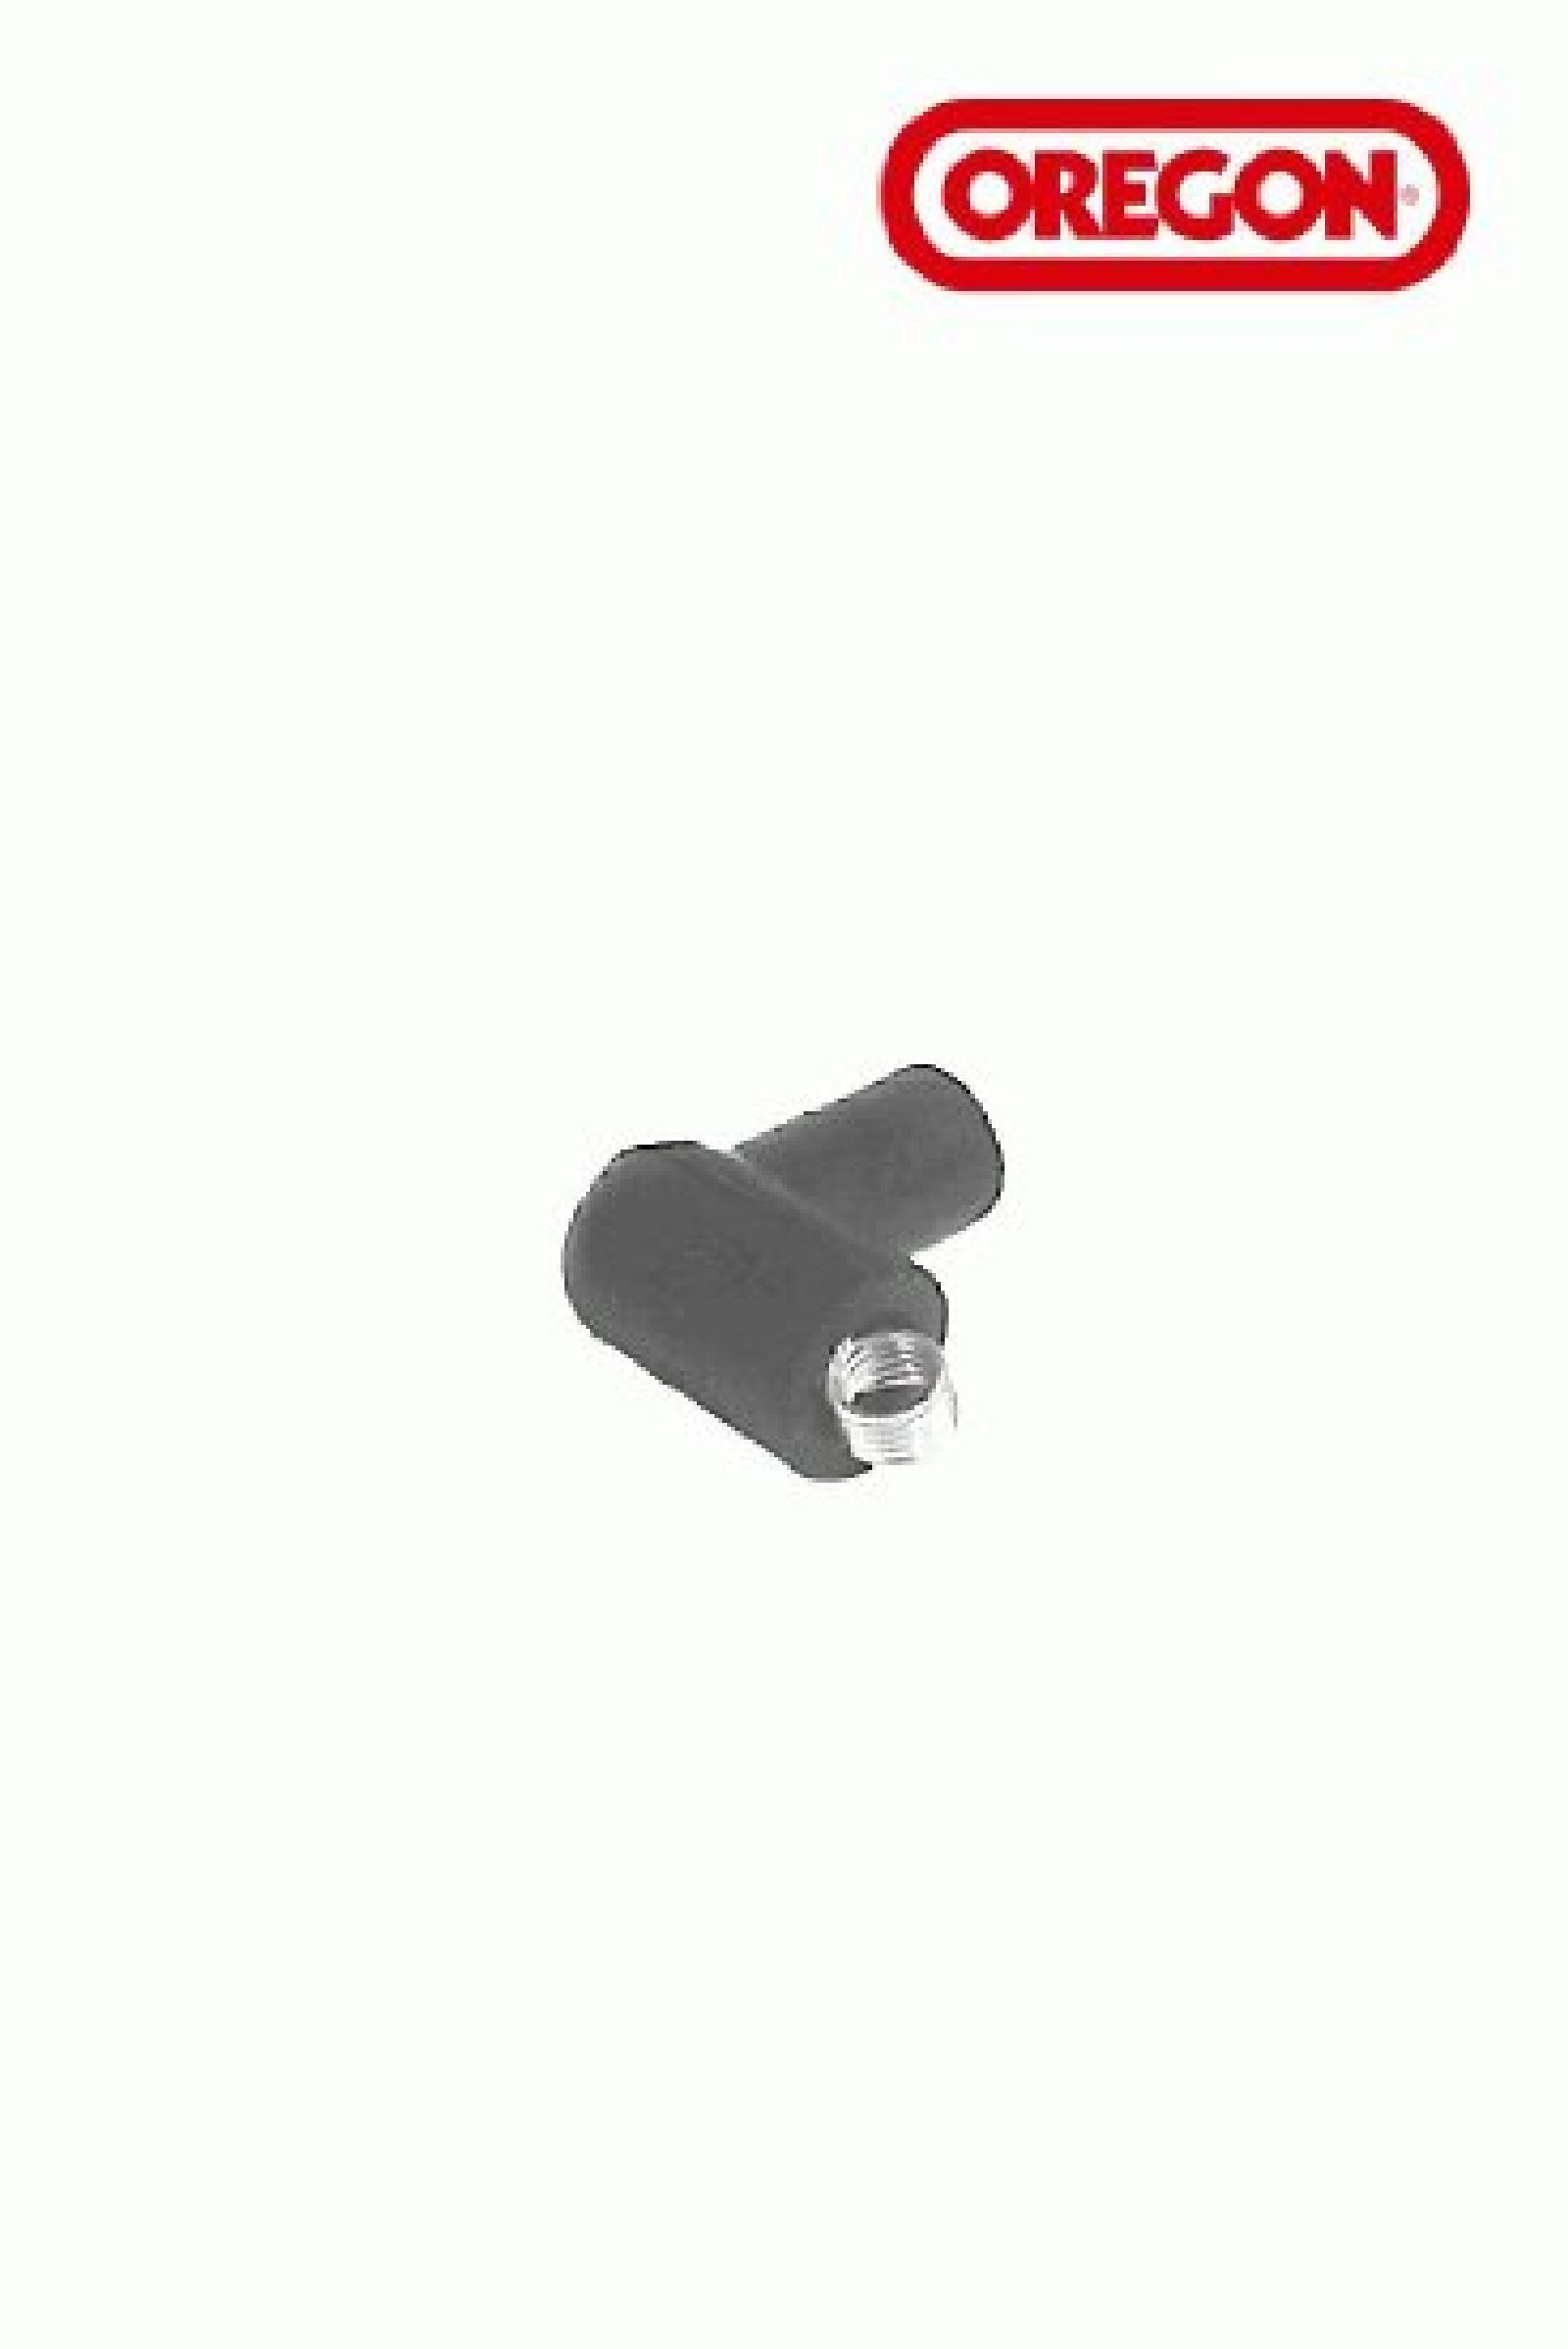 SPARK PLUG BOOT 5MM HOMEL part# 33-208 by Oregon - Click Image to Close